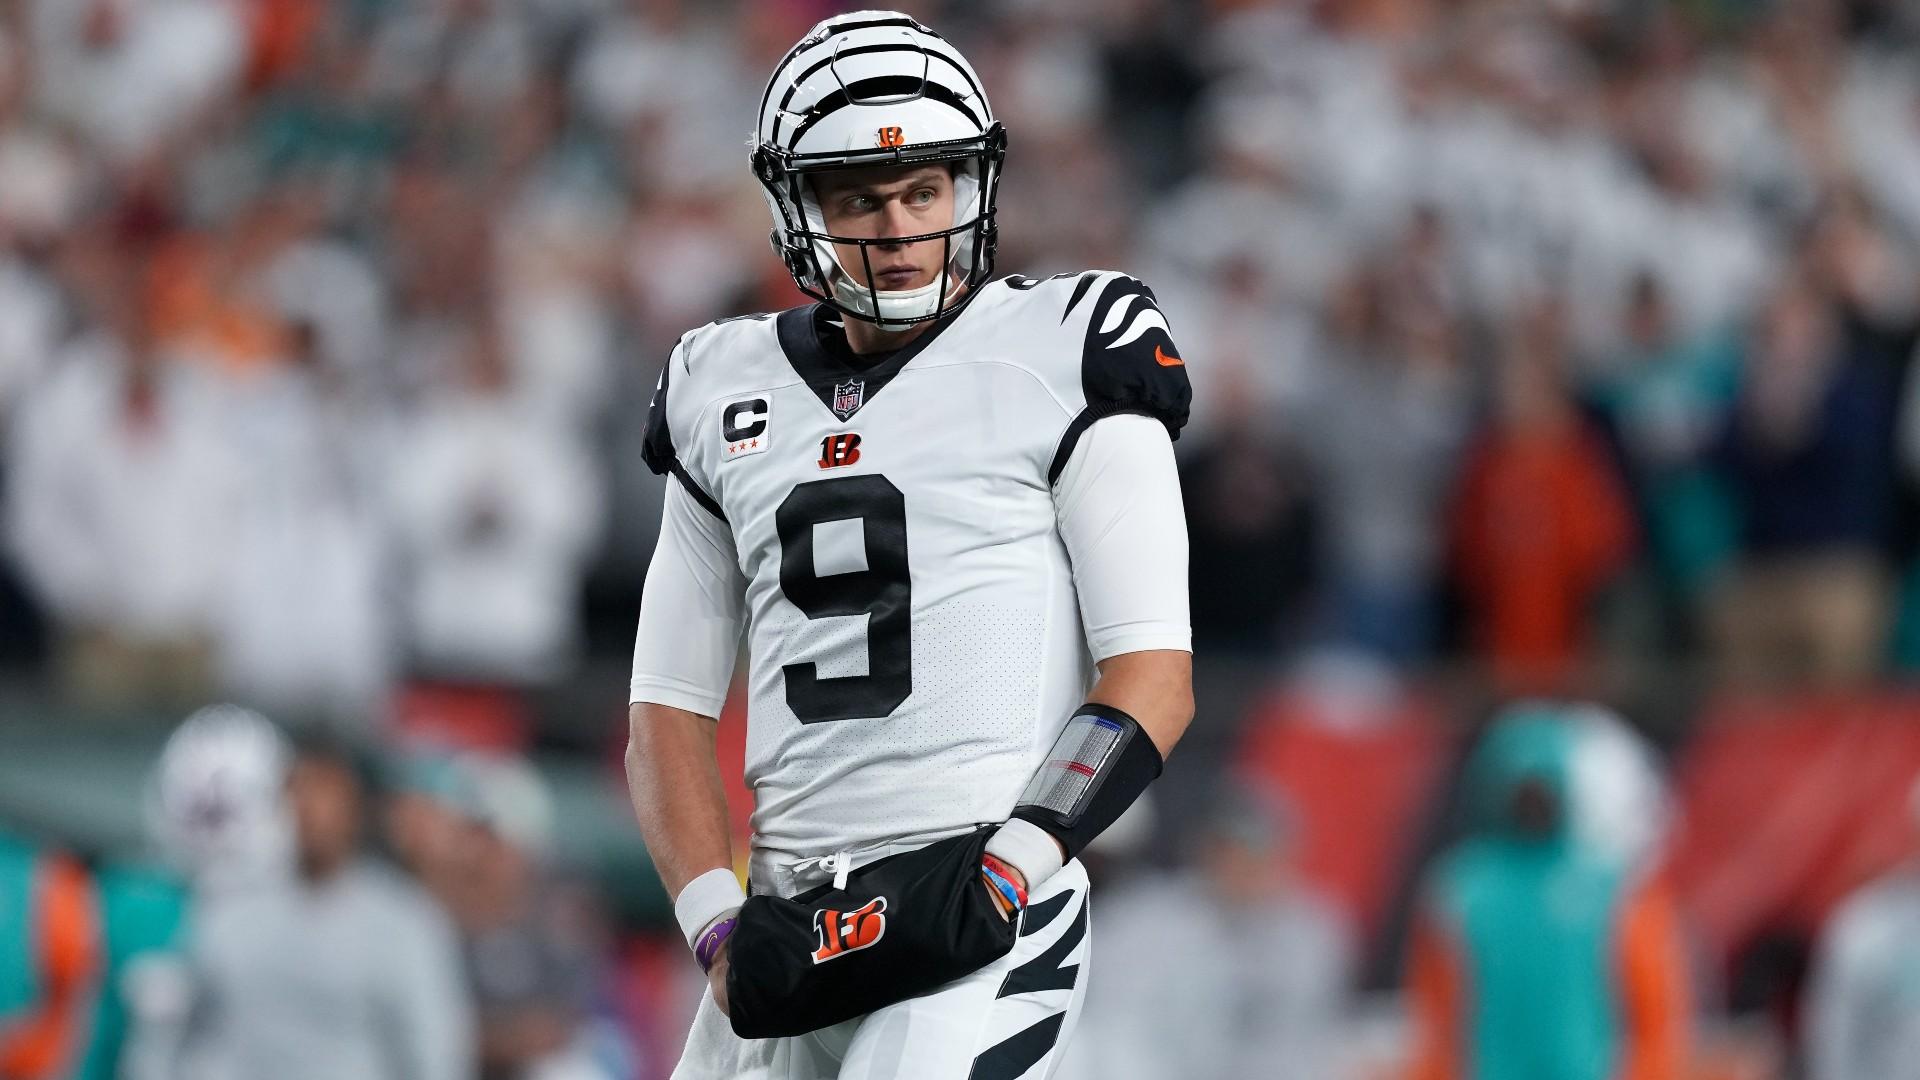 Bengals' Joe Burrow comments on Tua Tagovailoa's head injury, concussion protocol: Football 'is a dangerous game'